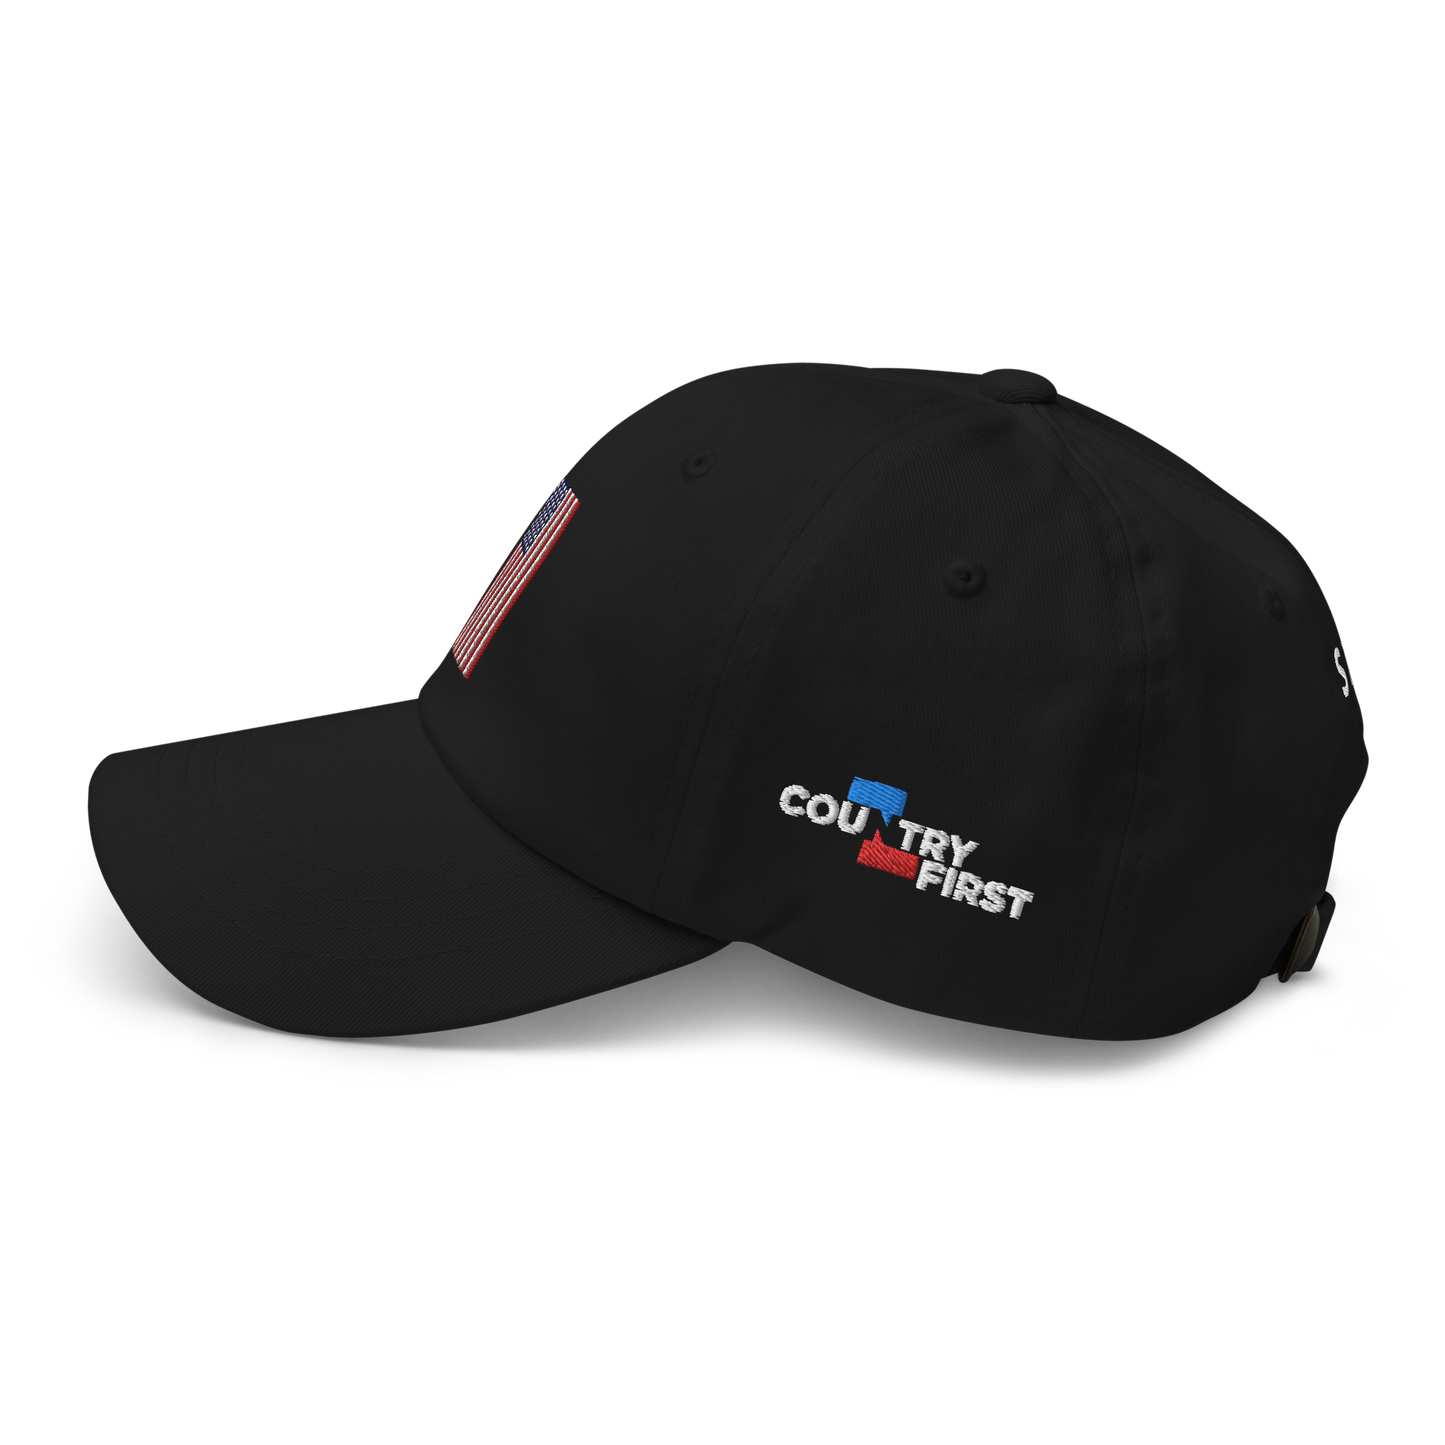 Stand For Truth Cap